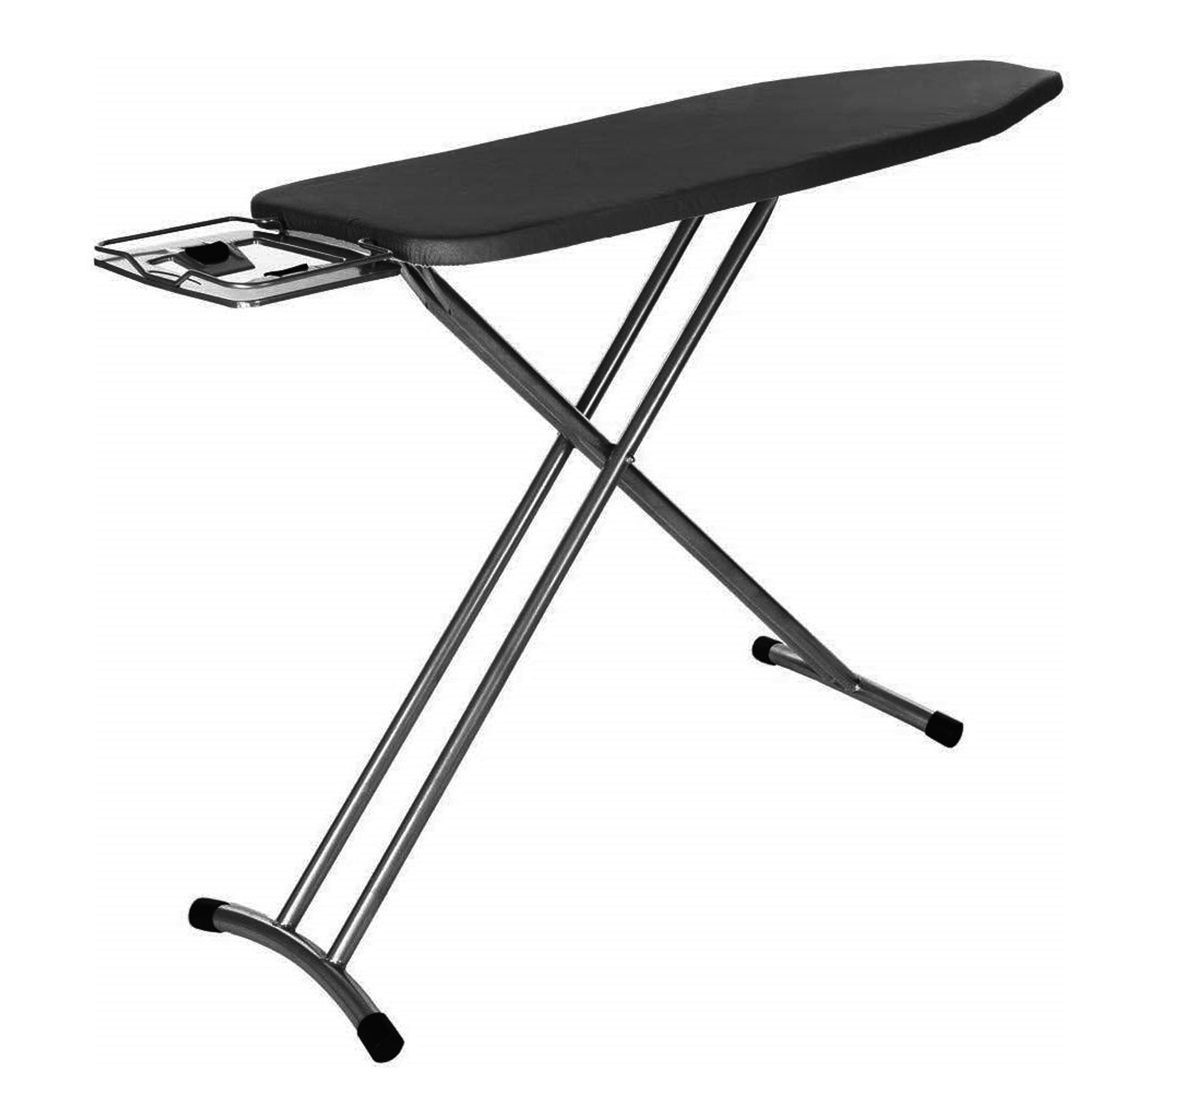 Black folding iron board stand with cotton cover